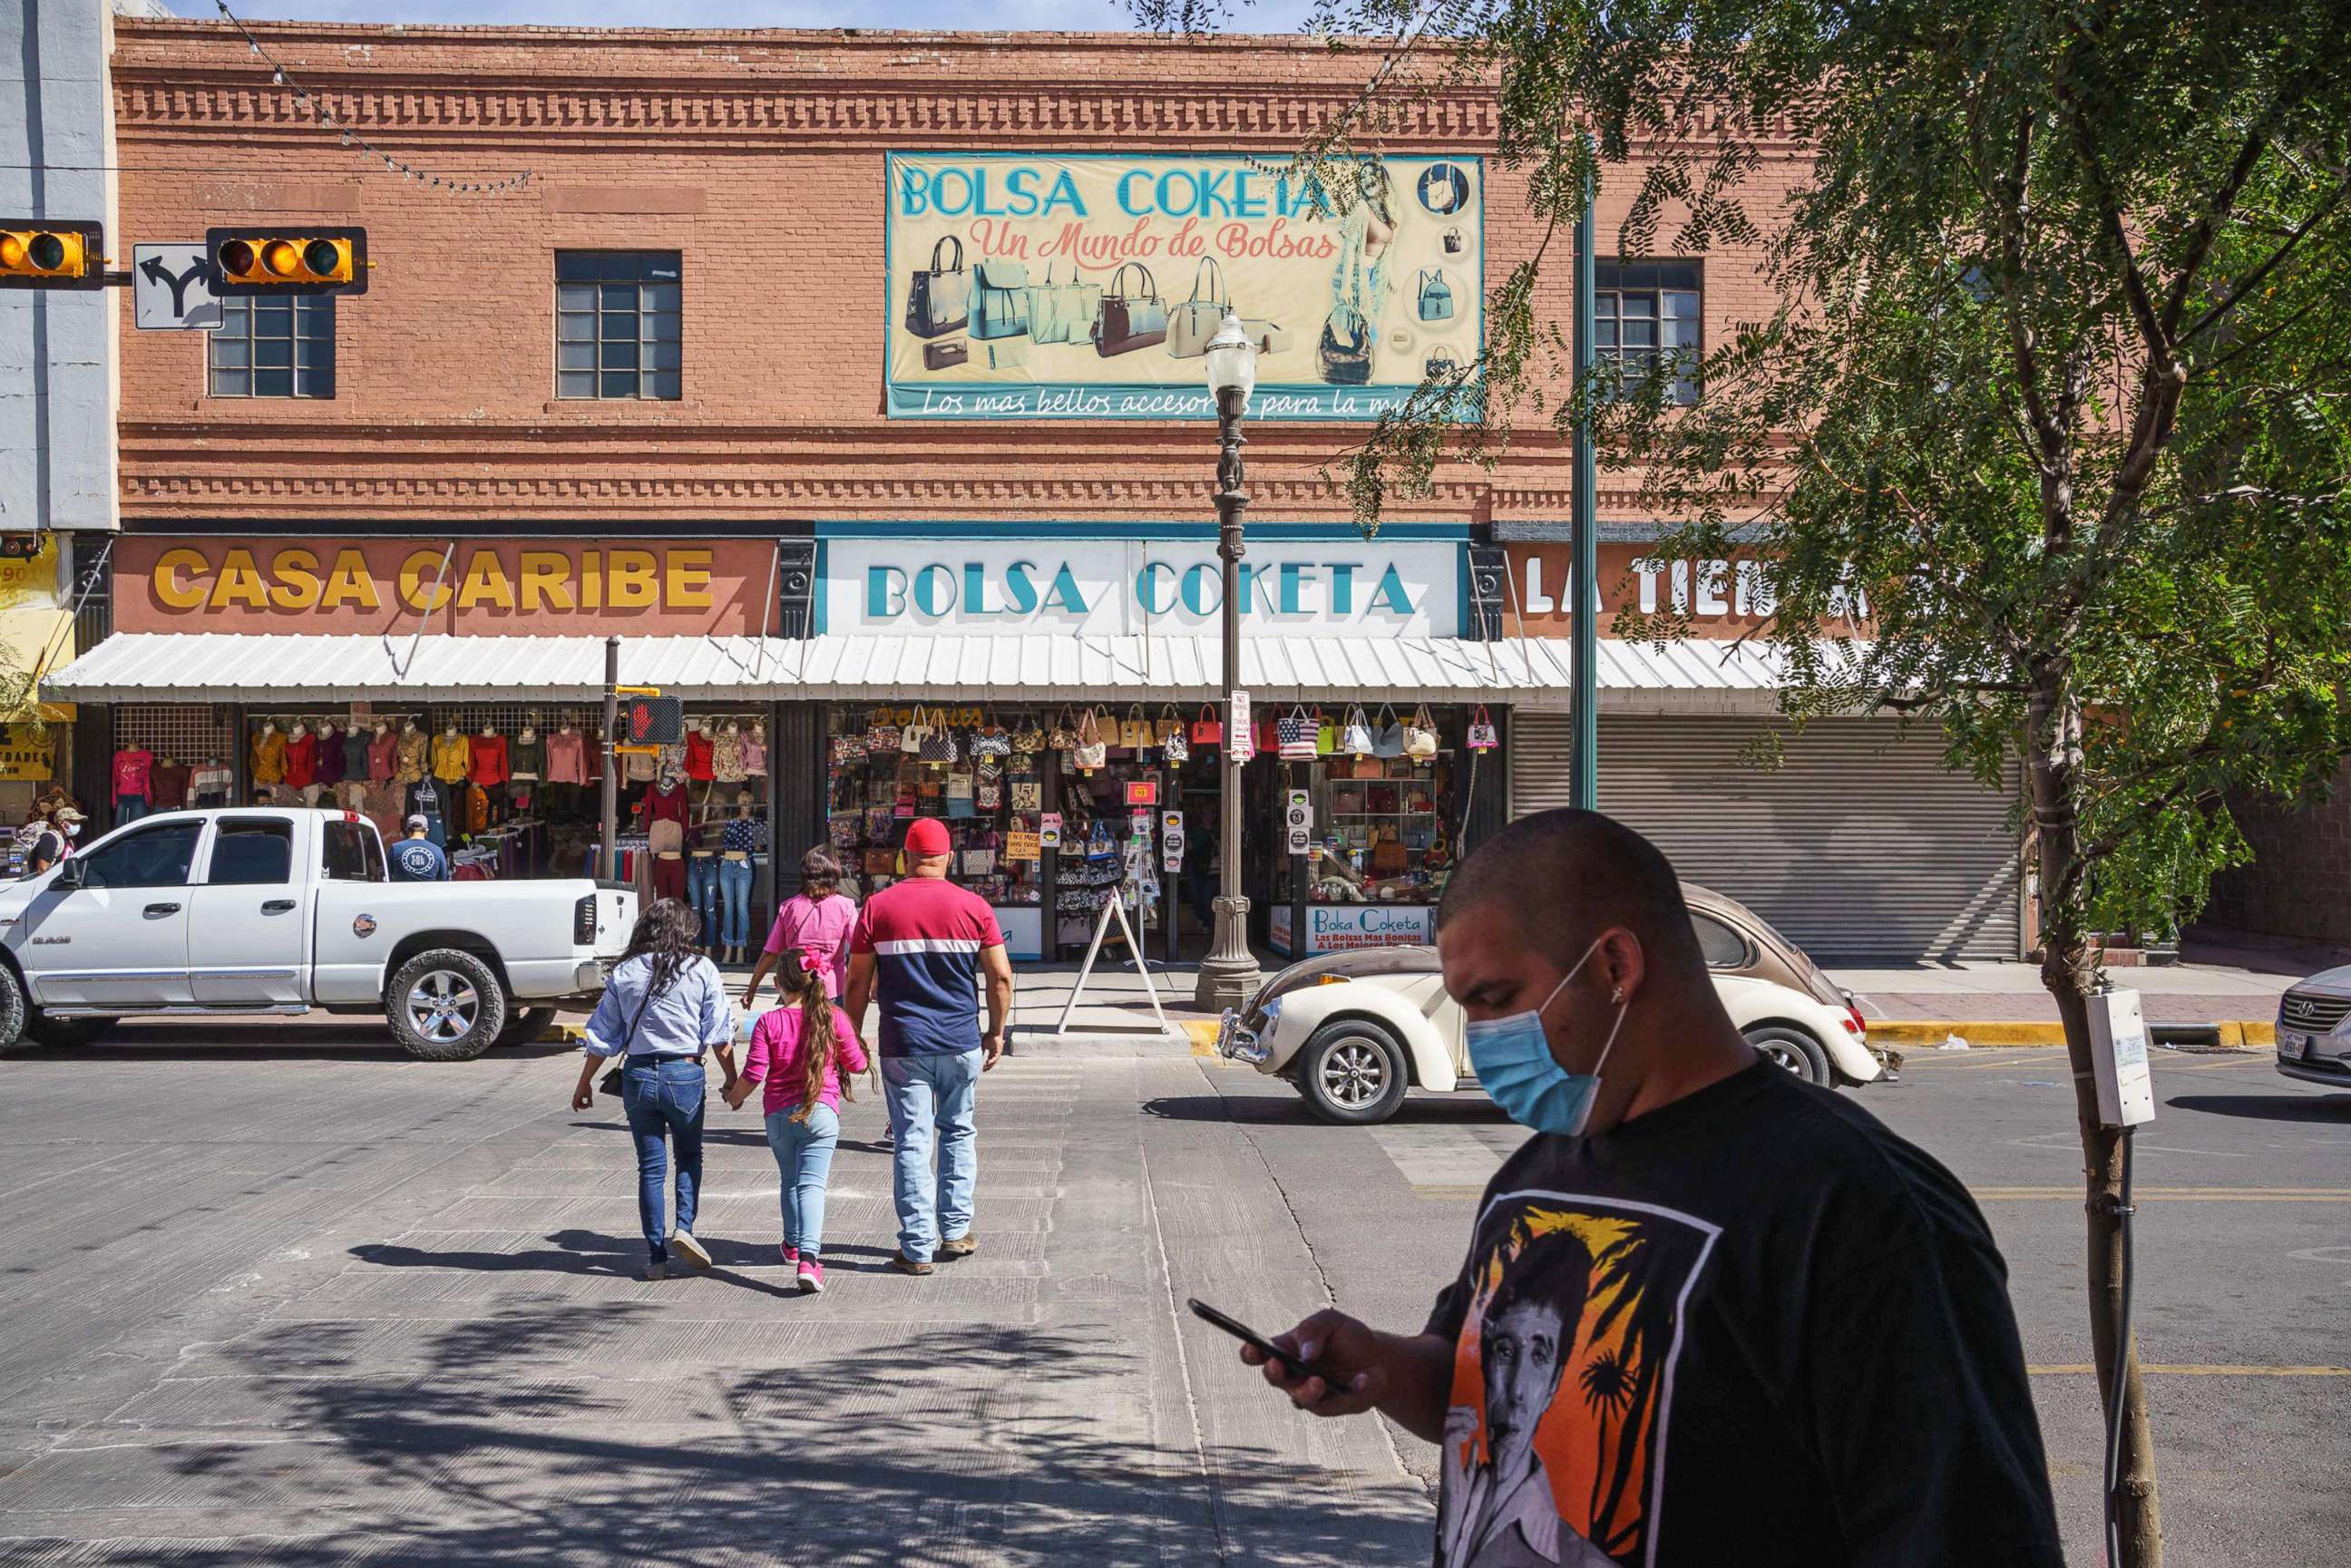 PHOTO: People wearing masks amid the Covid-19 pandemic are pictured in downtown El Paso, Texas, Oct. 24, 2020.